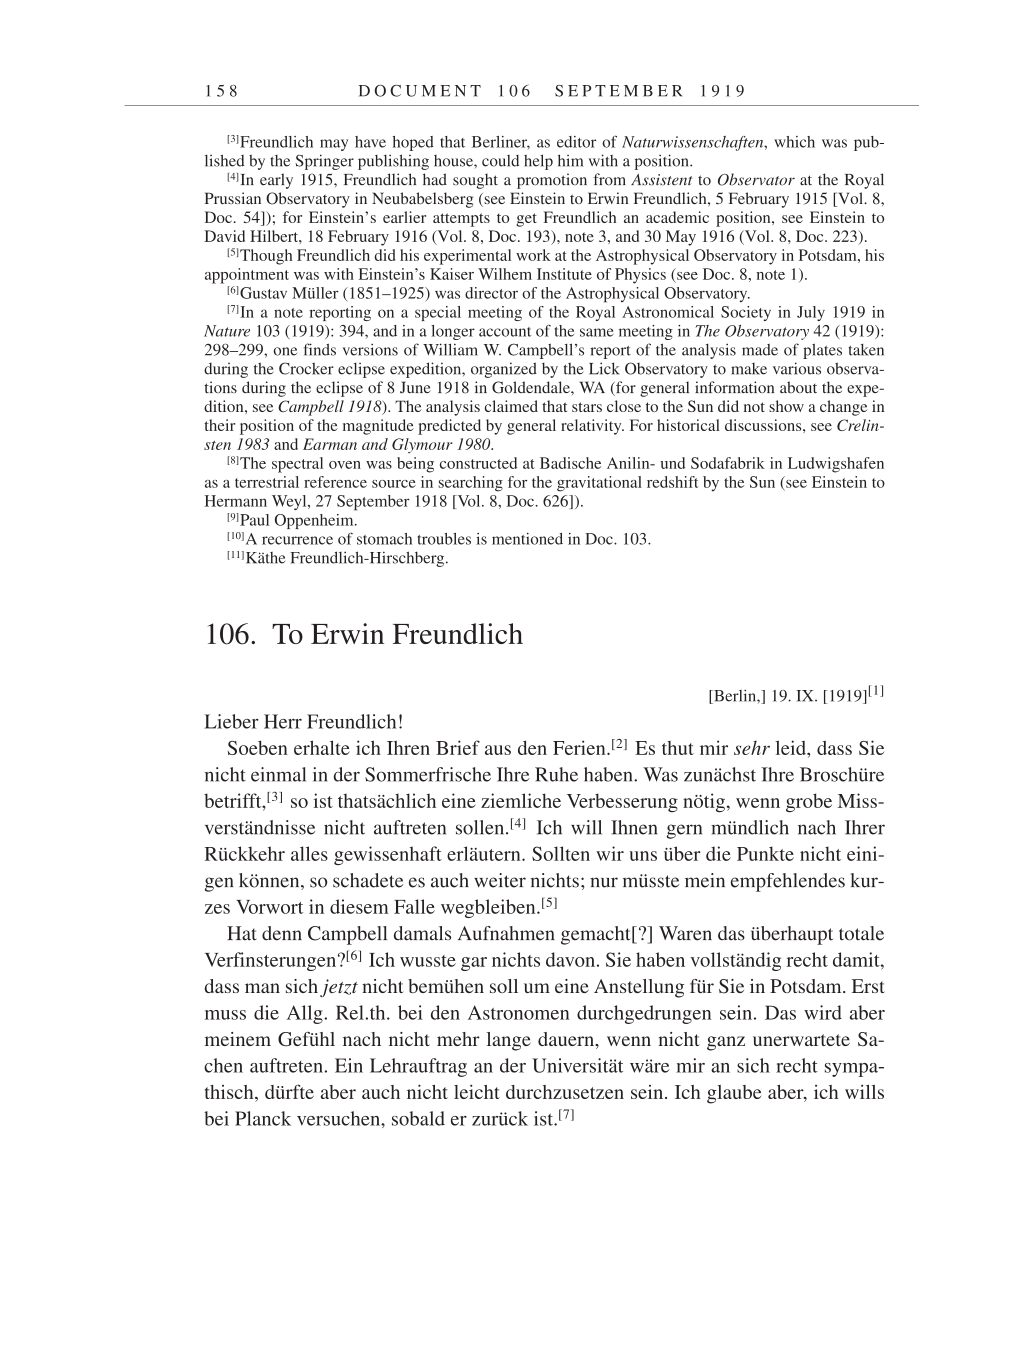 Volume 9: The Berlin Years: Correspondence January 1919-April 1920 page 158